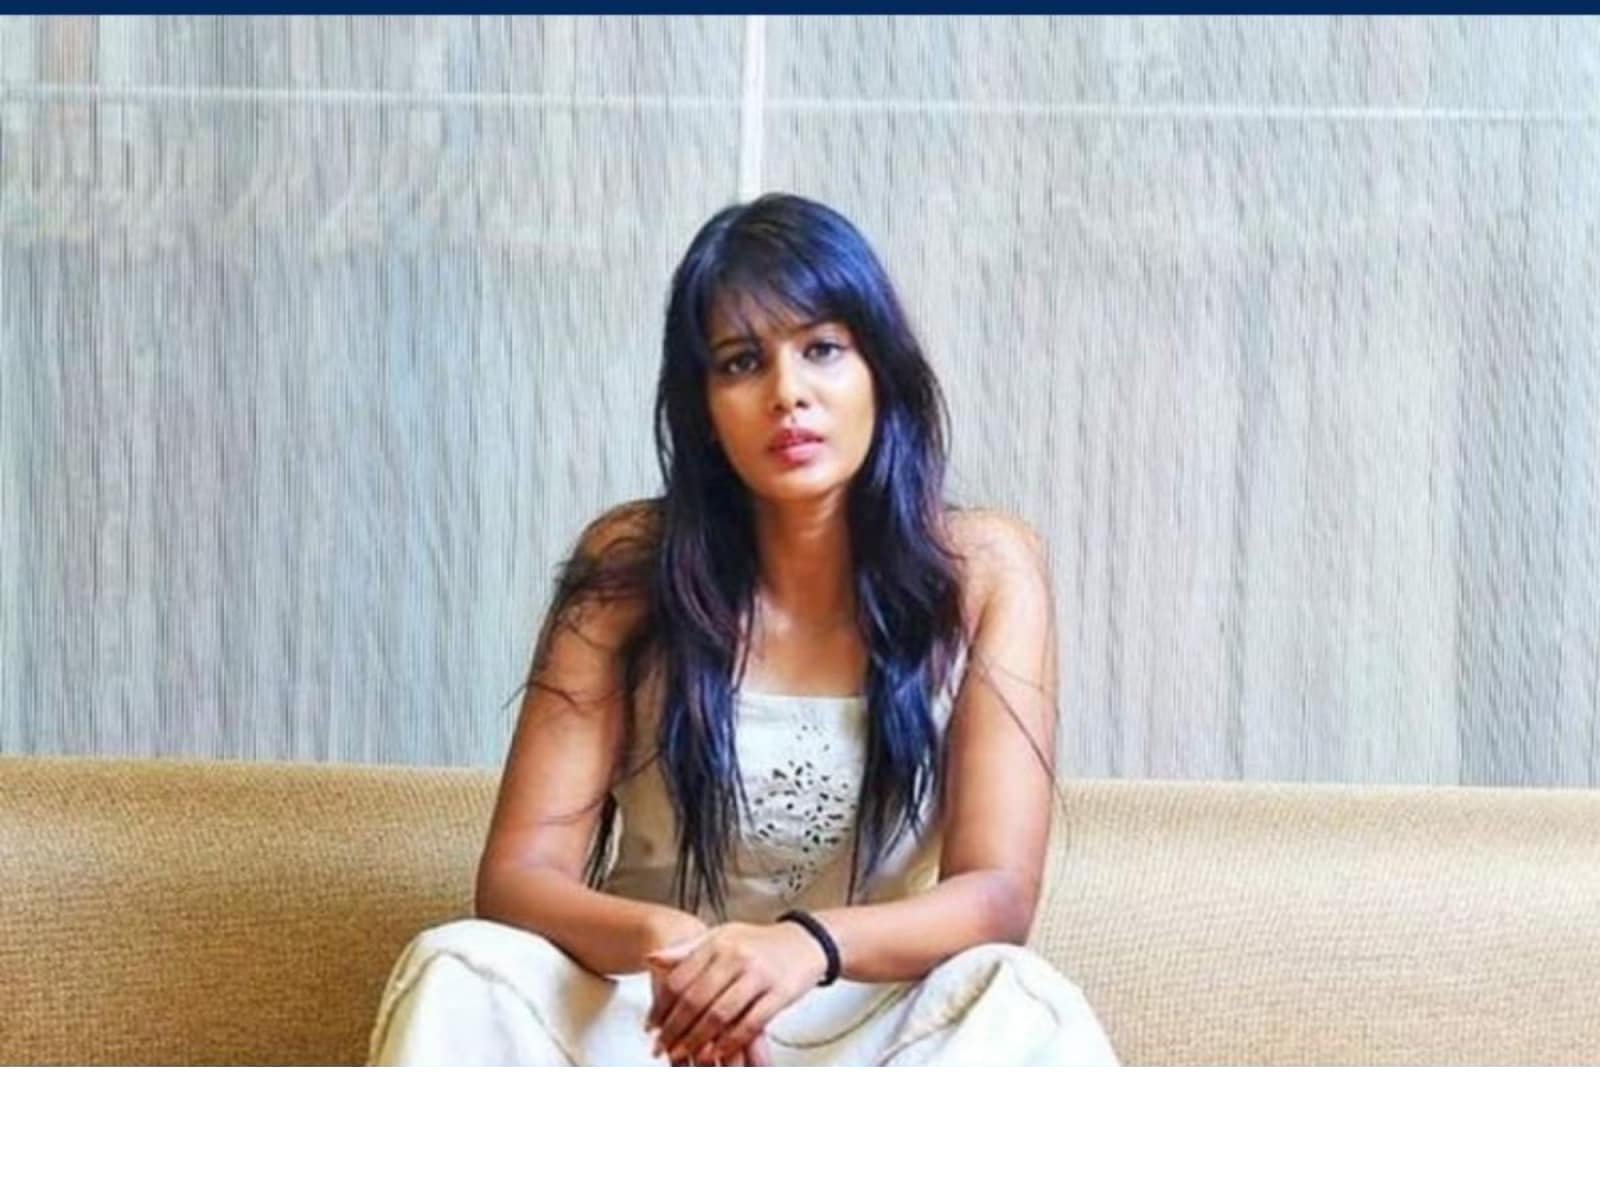 Actress Meera Porn Videos 3gp - Actress Meera Mitun Misses Court Hearing, Police Say She is Absconding -  News18